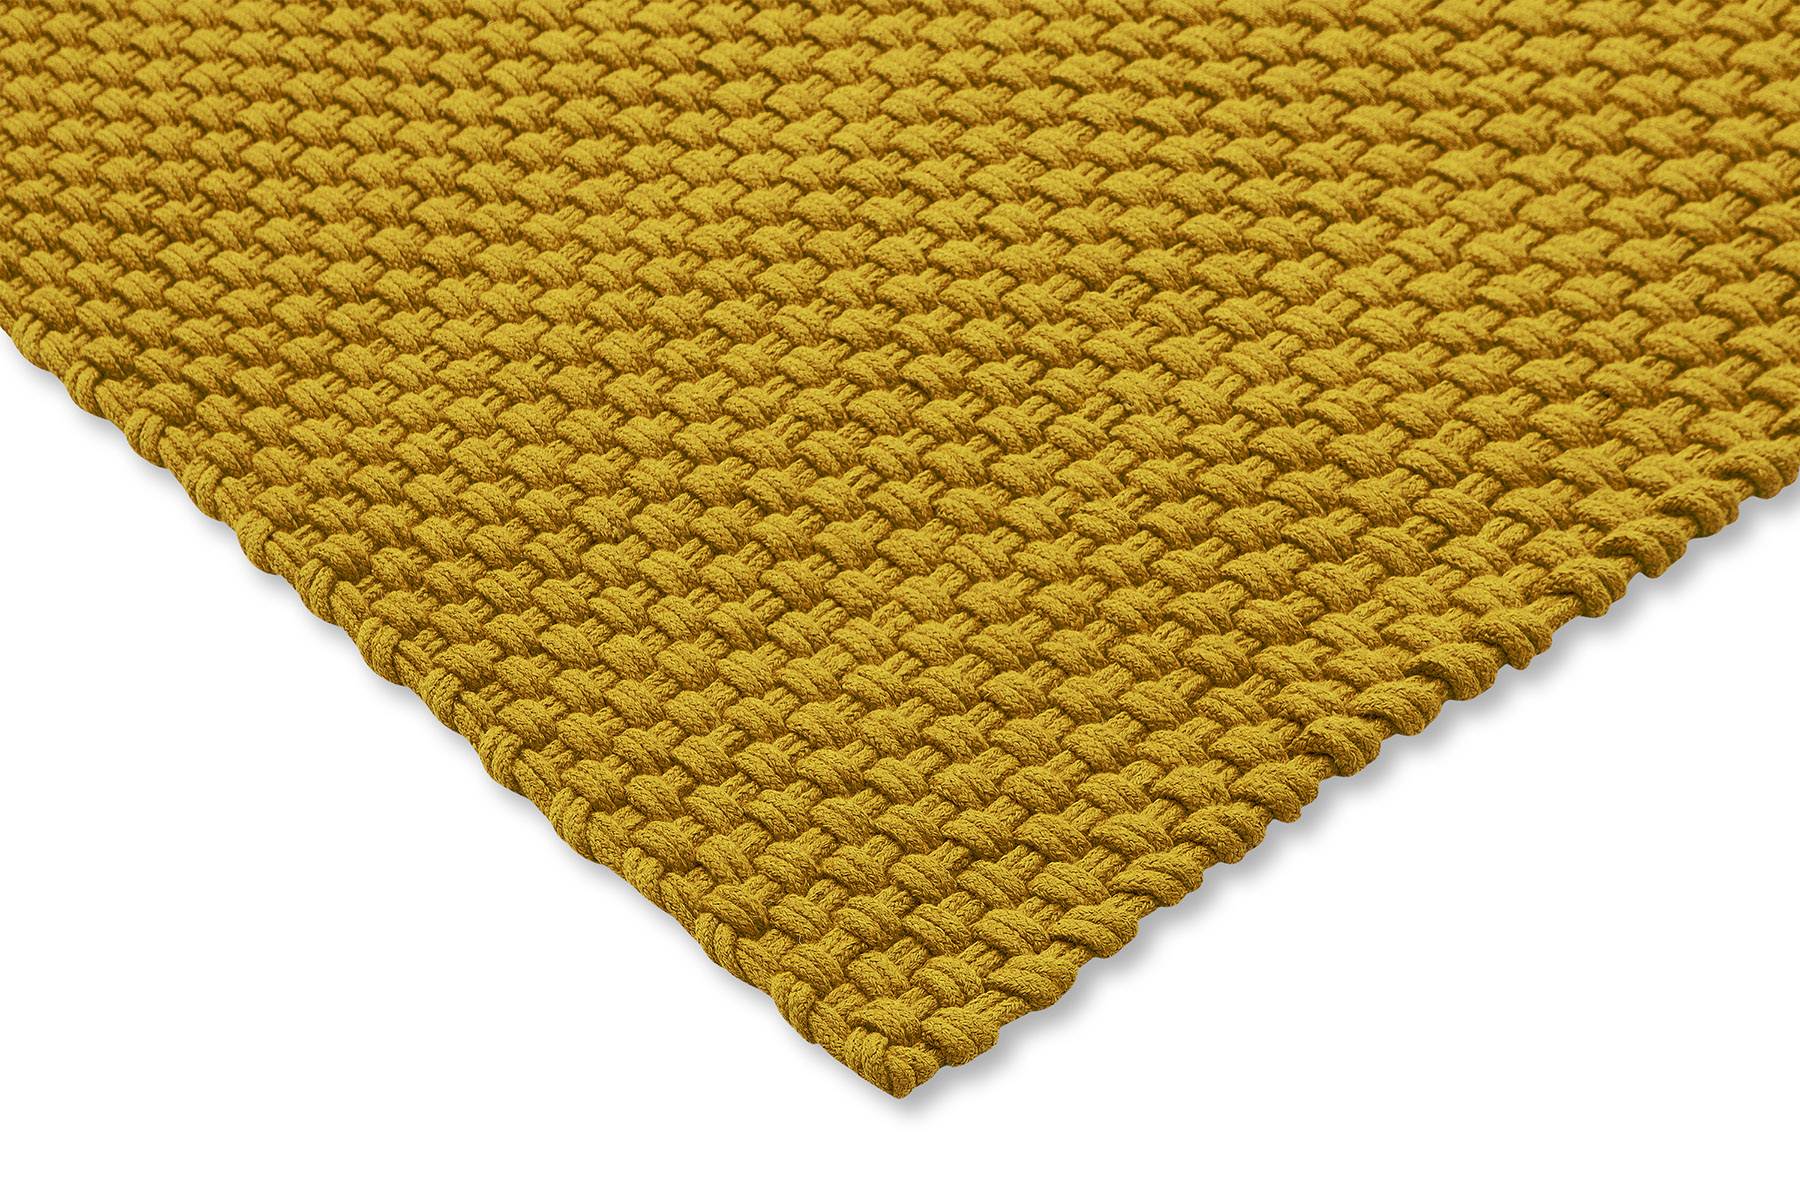 Lace Mustard Outdoor 497006 Rug ☞ Size: 160 x 230 cm